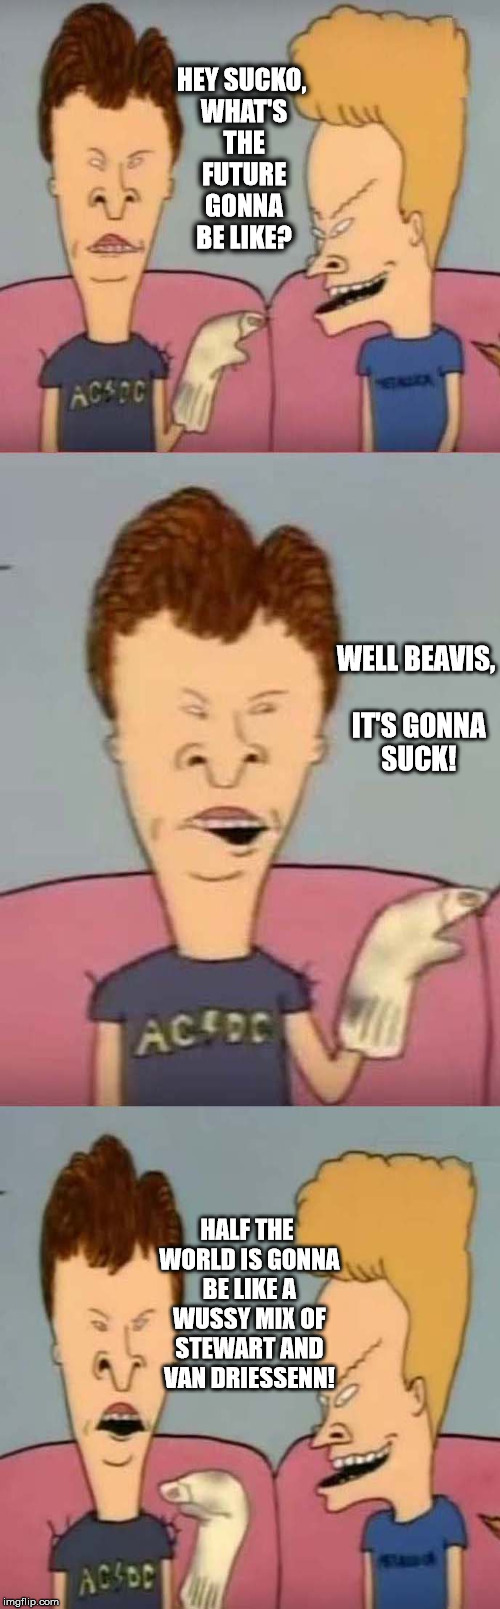 Sucko Future | HEY SUCKO, WHAT'S THE FUTURE GONNA BE LIKE? WELL BEAVIS, IT'S GONNA SUCK! HALF THE WORLD IS GONNA BE LIKE A WUSSY MIX OF STEWART AND VAN DRIESSENN! | image tagged in beavis and butthead,future | made w/ Imgflip meme maker